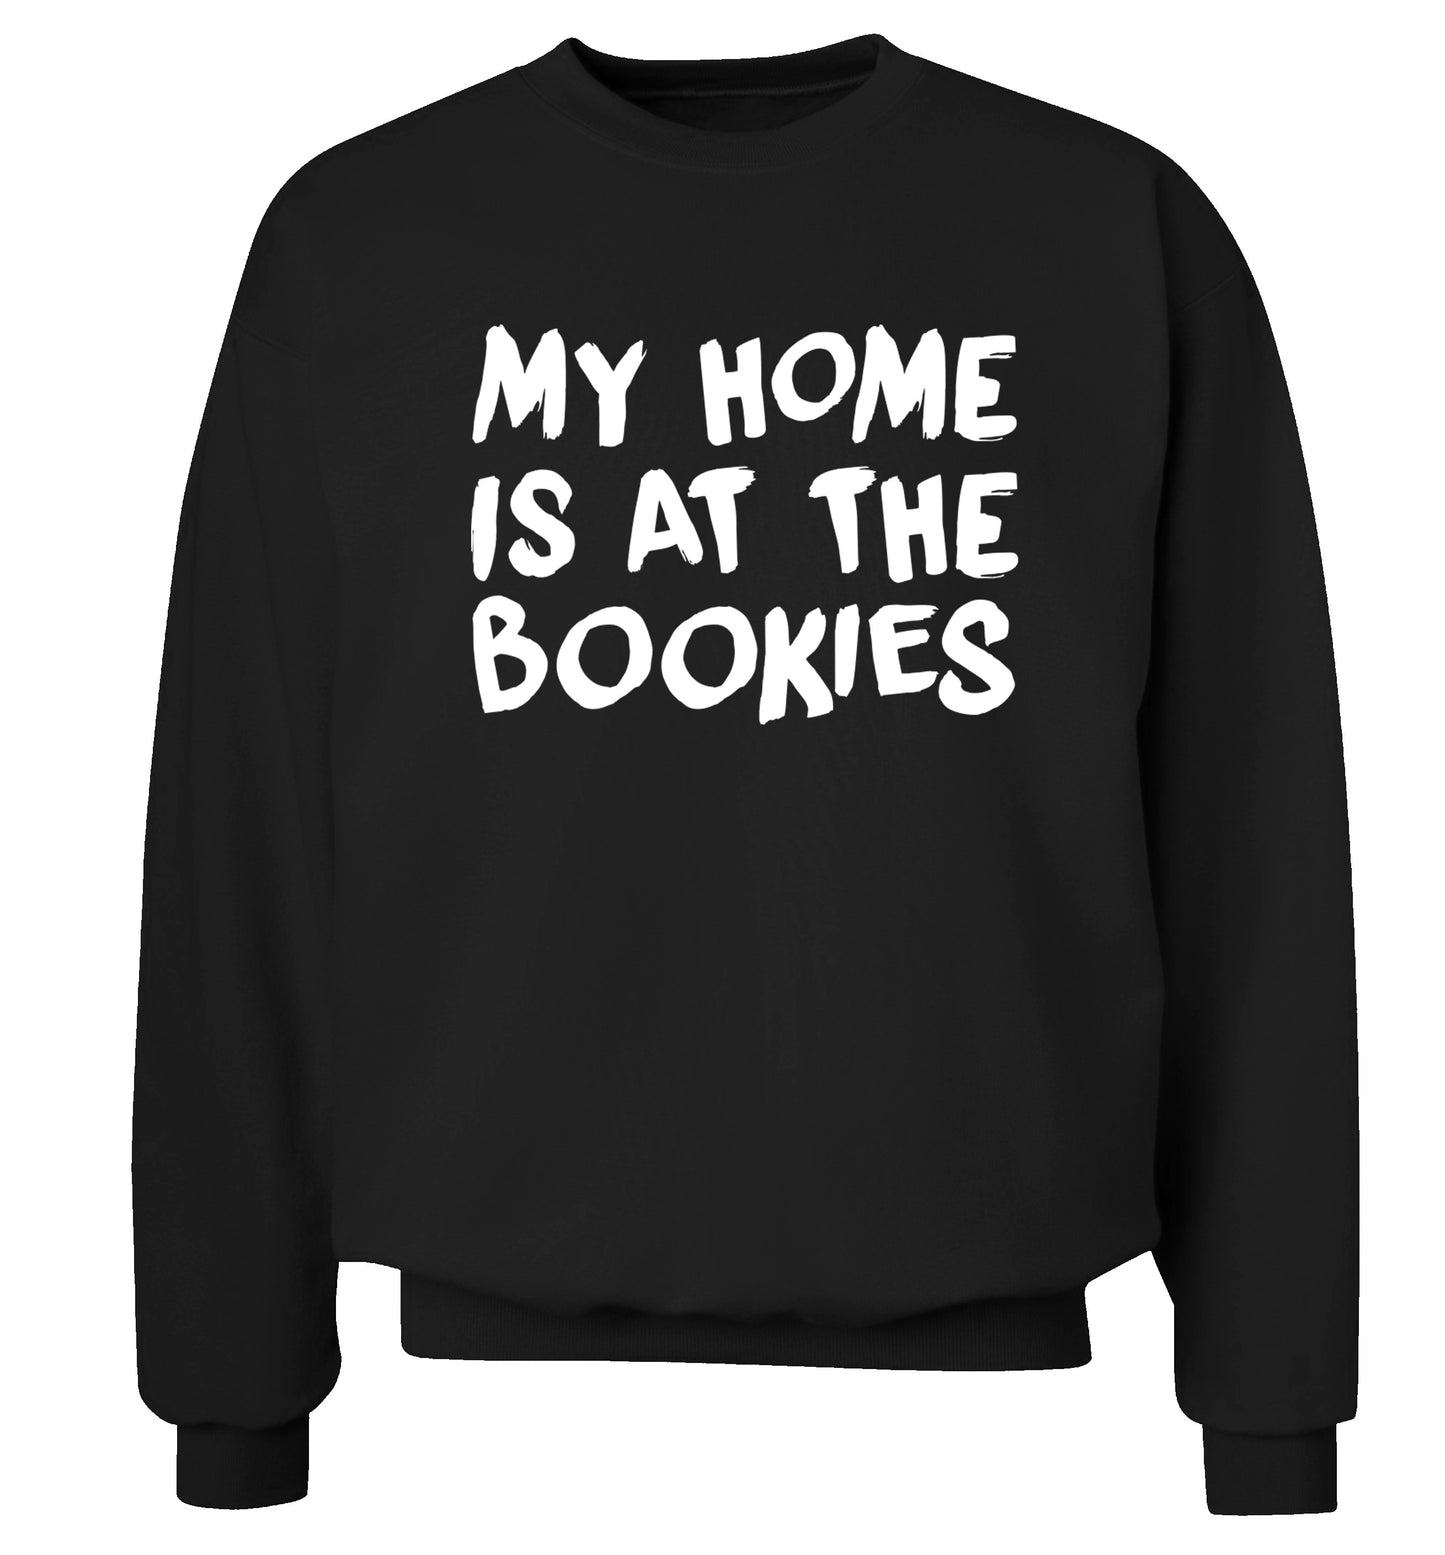 My home is at the bookies Adult's unisex black Sweater 2XL